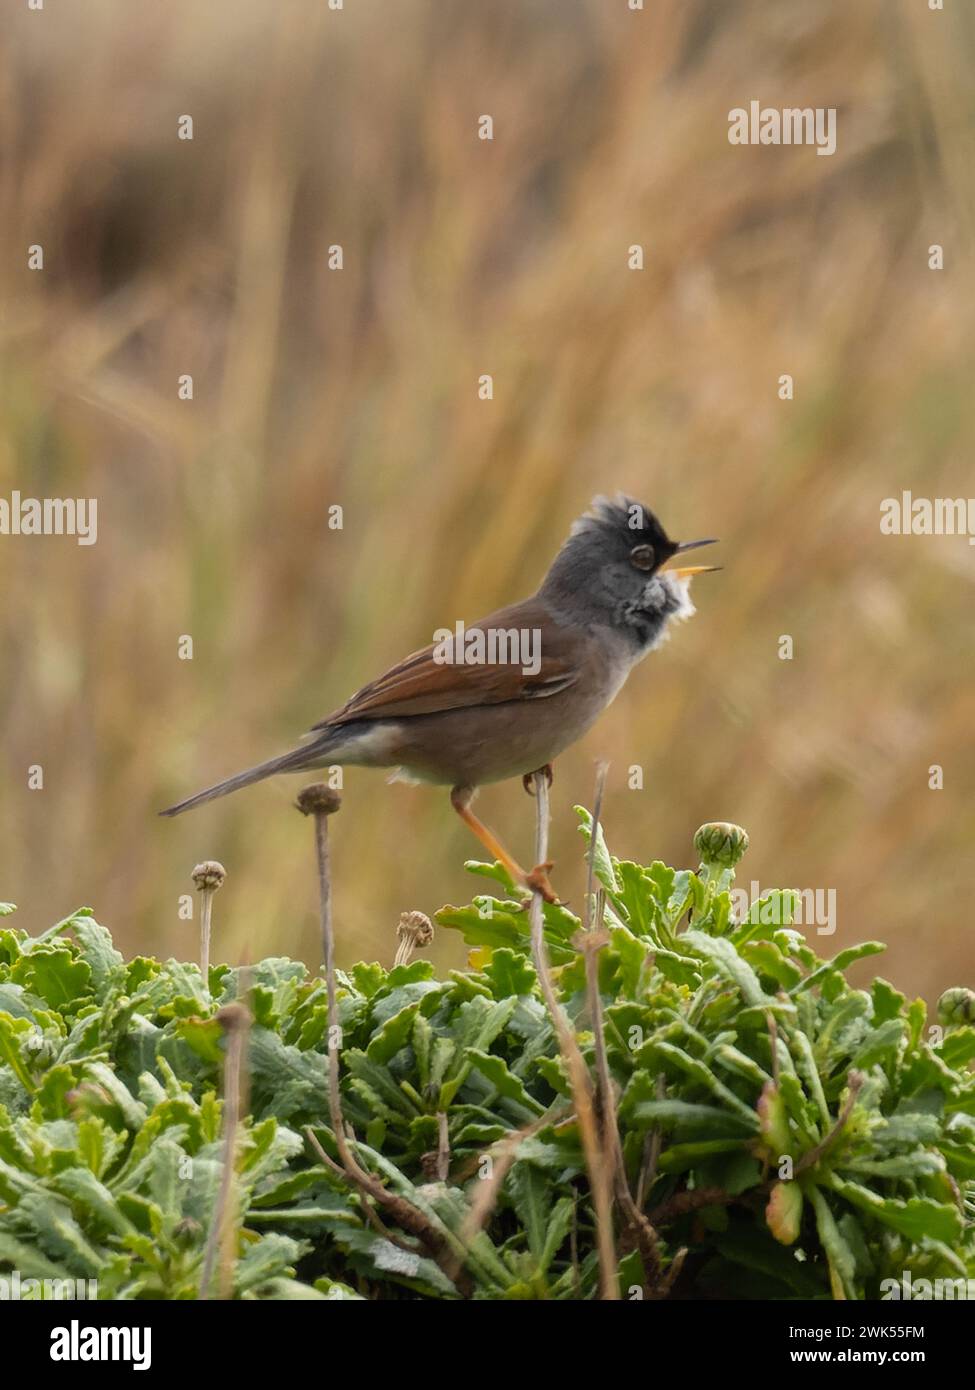 A spectacled warbler, Curruca conspicillata, singing from the top of a bush. Stock Photo